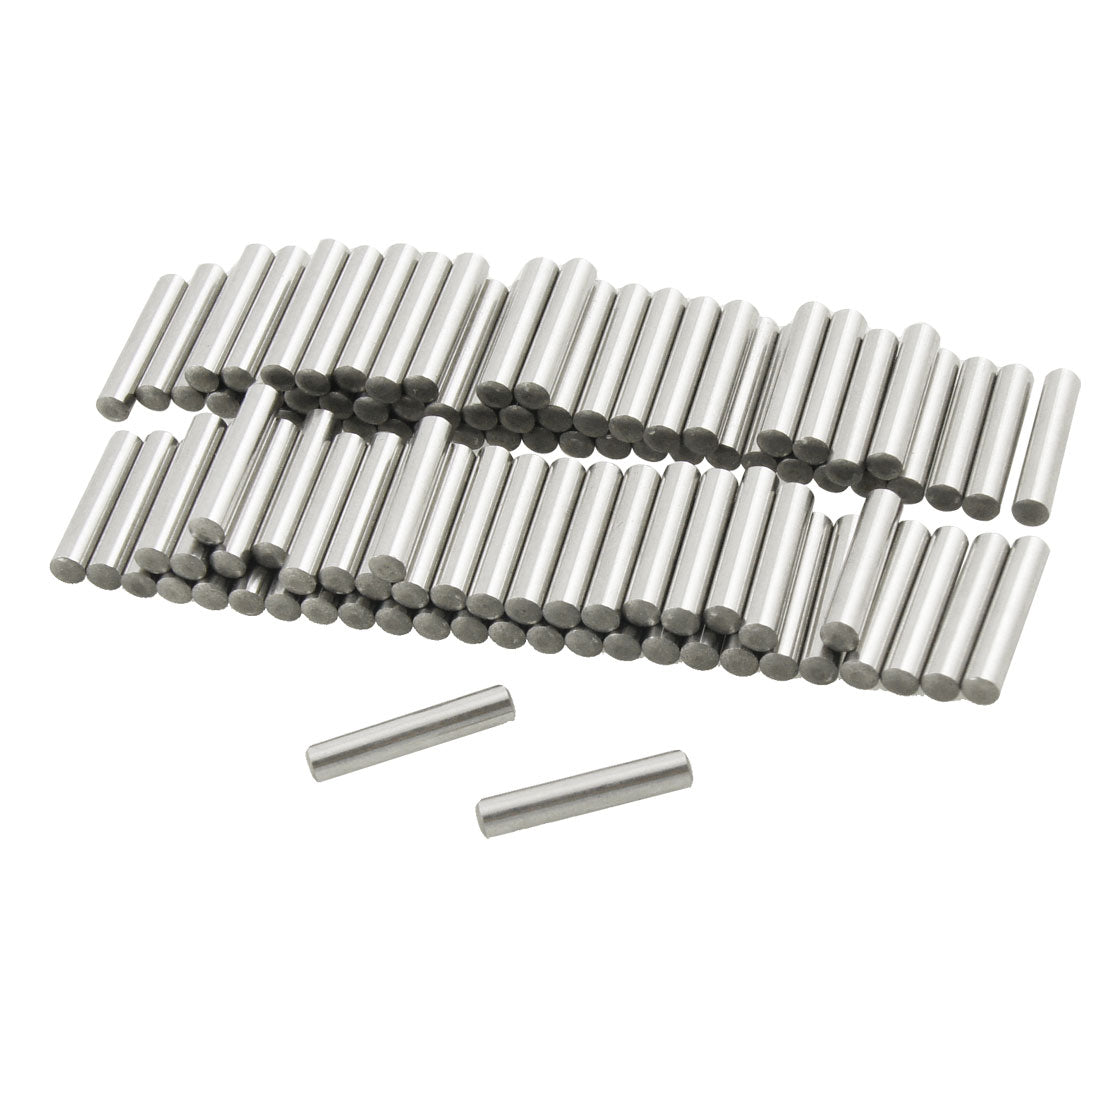 uxcell Uxcell 100 Pcs Stainless Steel 2.9mm x 15.8mm Dowel Pins Fasten Elements